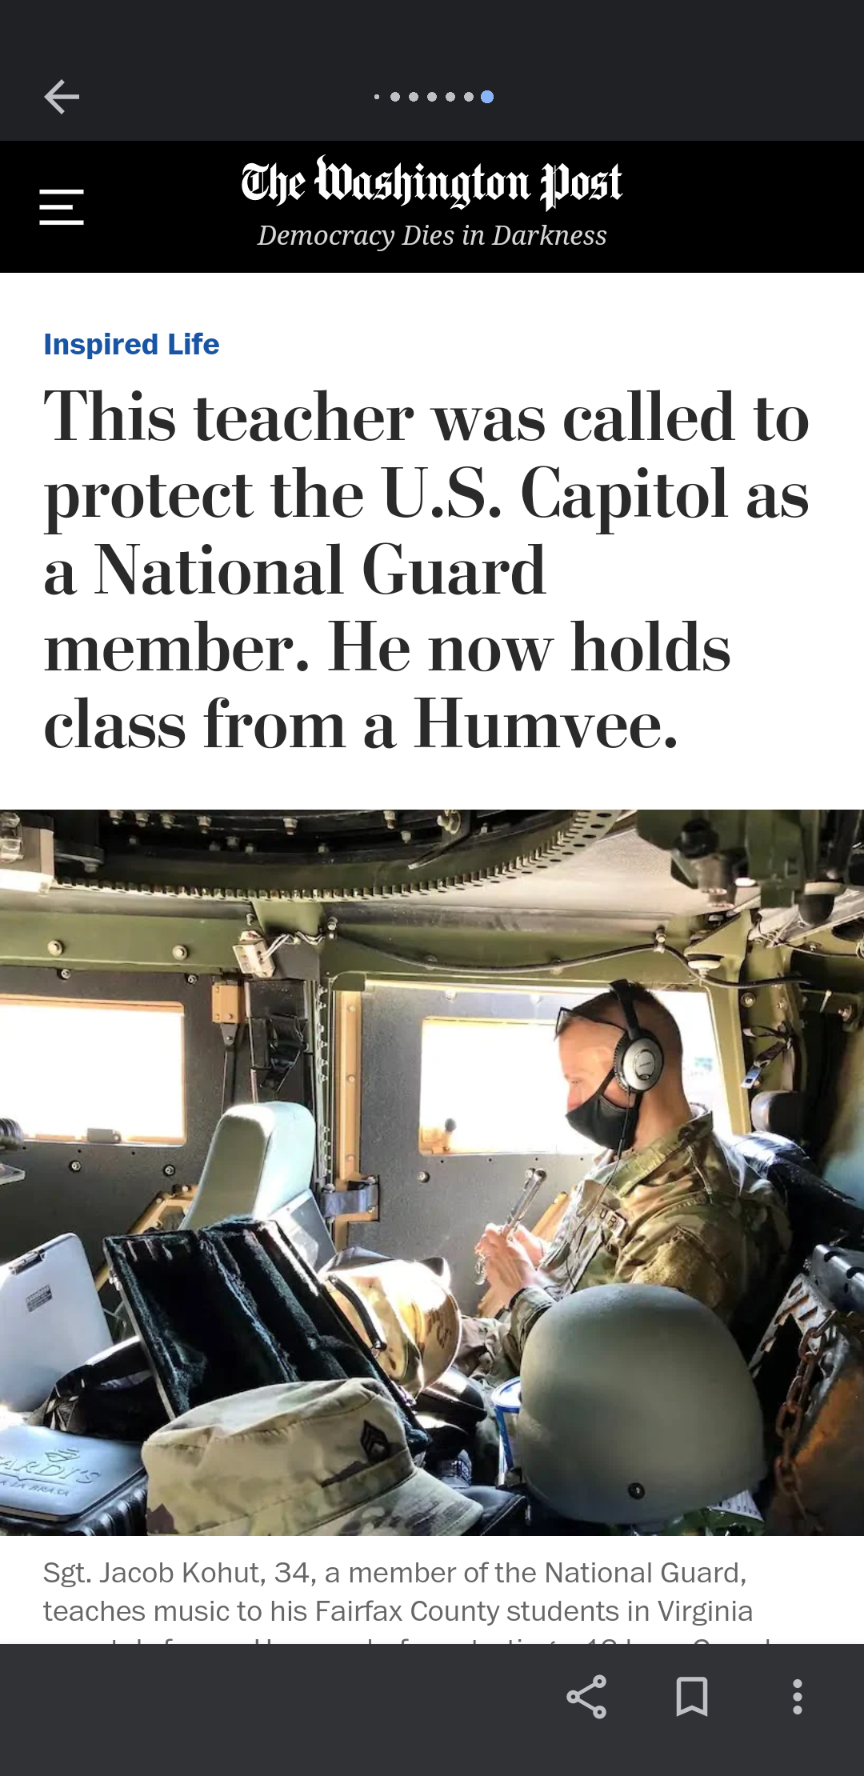 zambaiti parati - The Washington Post Democracy Dies in darkness Inspired Life This teacher was called to protect the U.S. Capitol as a National Guard member. He now holds class from a Humvee. Set Jacob Kohut. 34, a member of the National Guard, teaches m